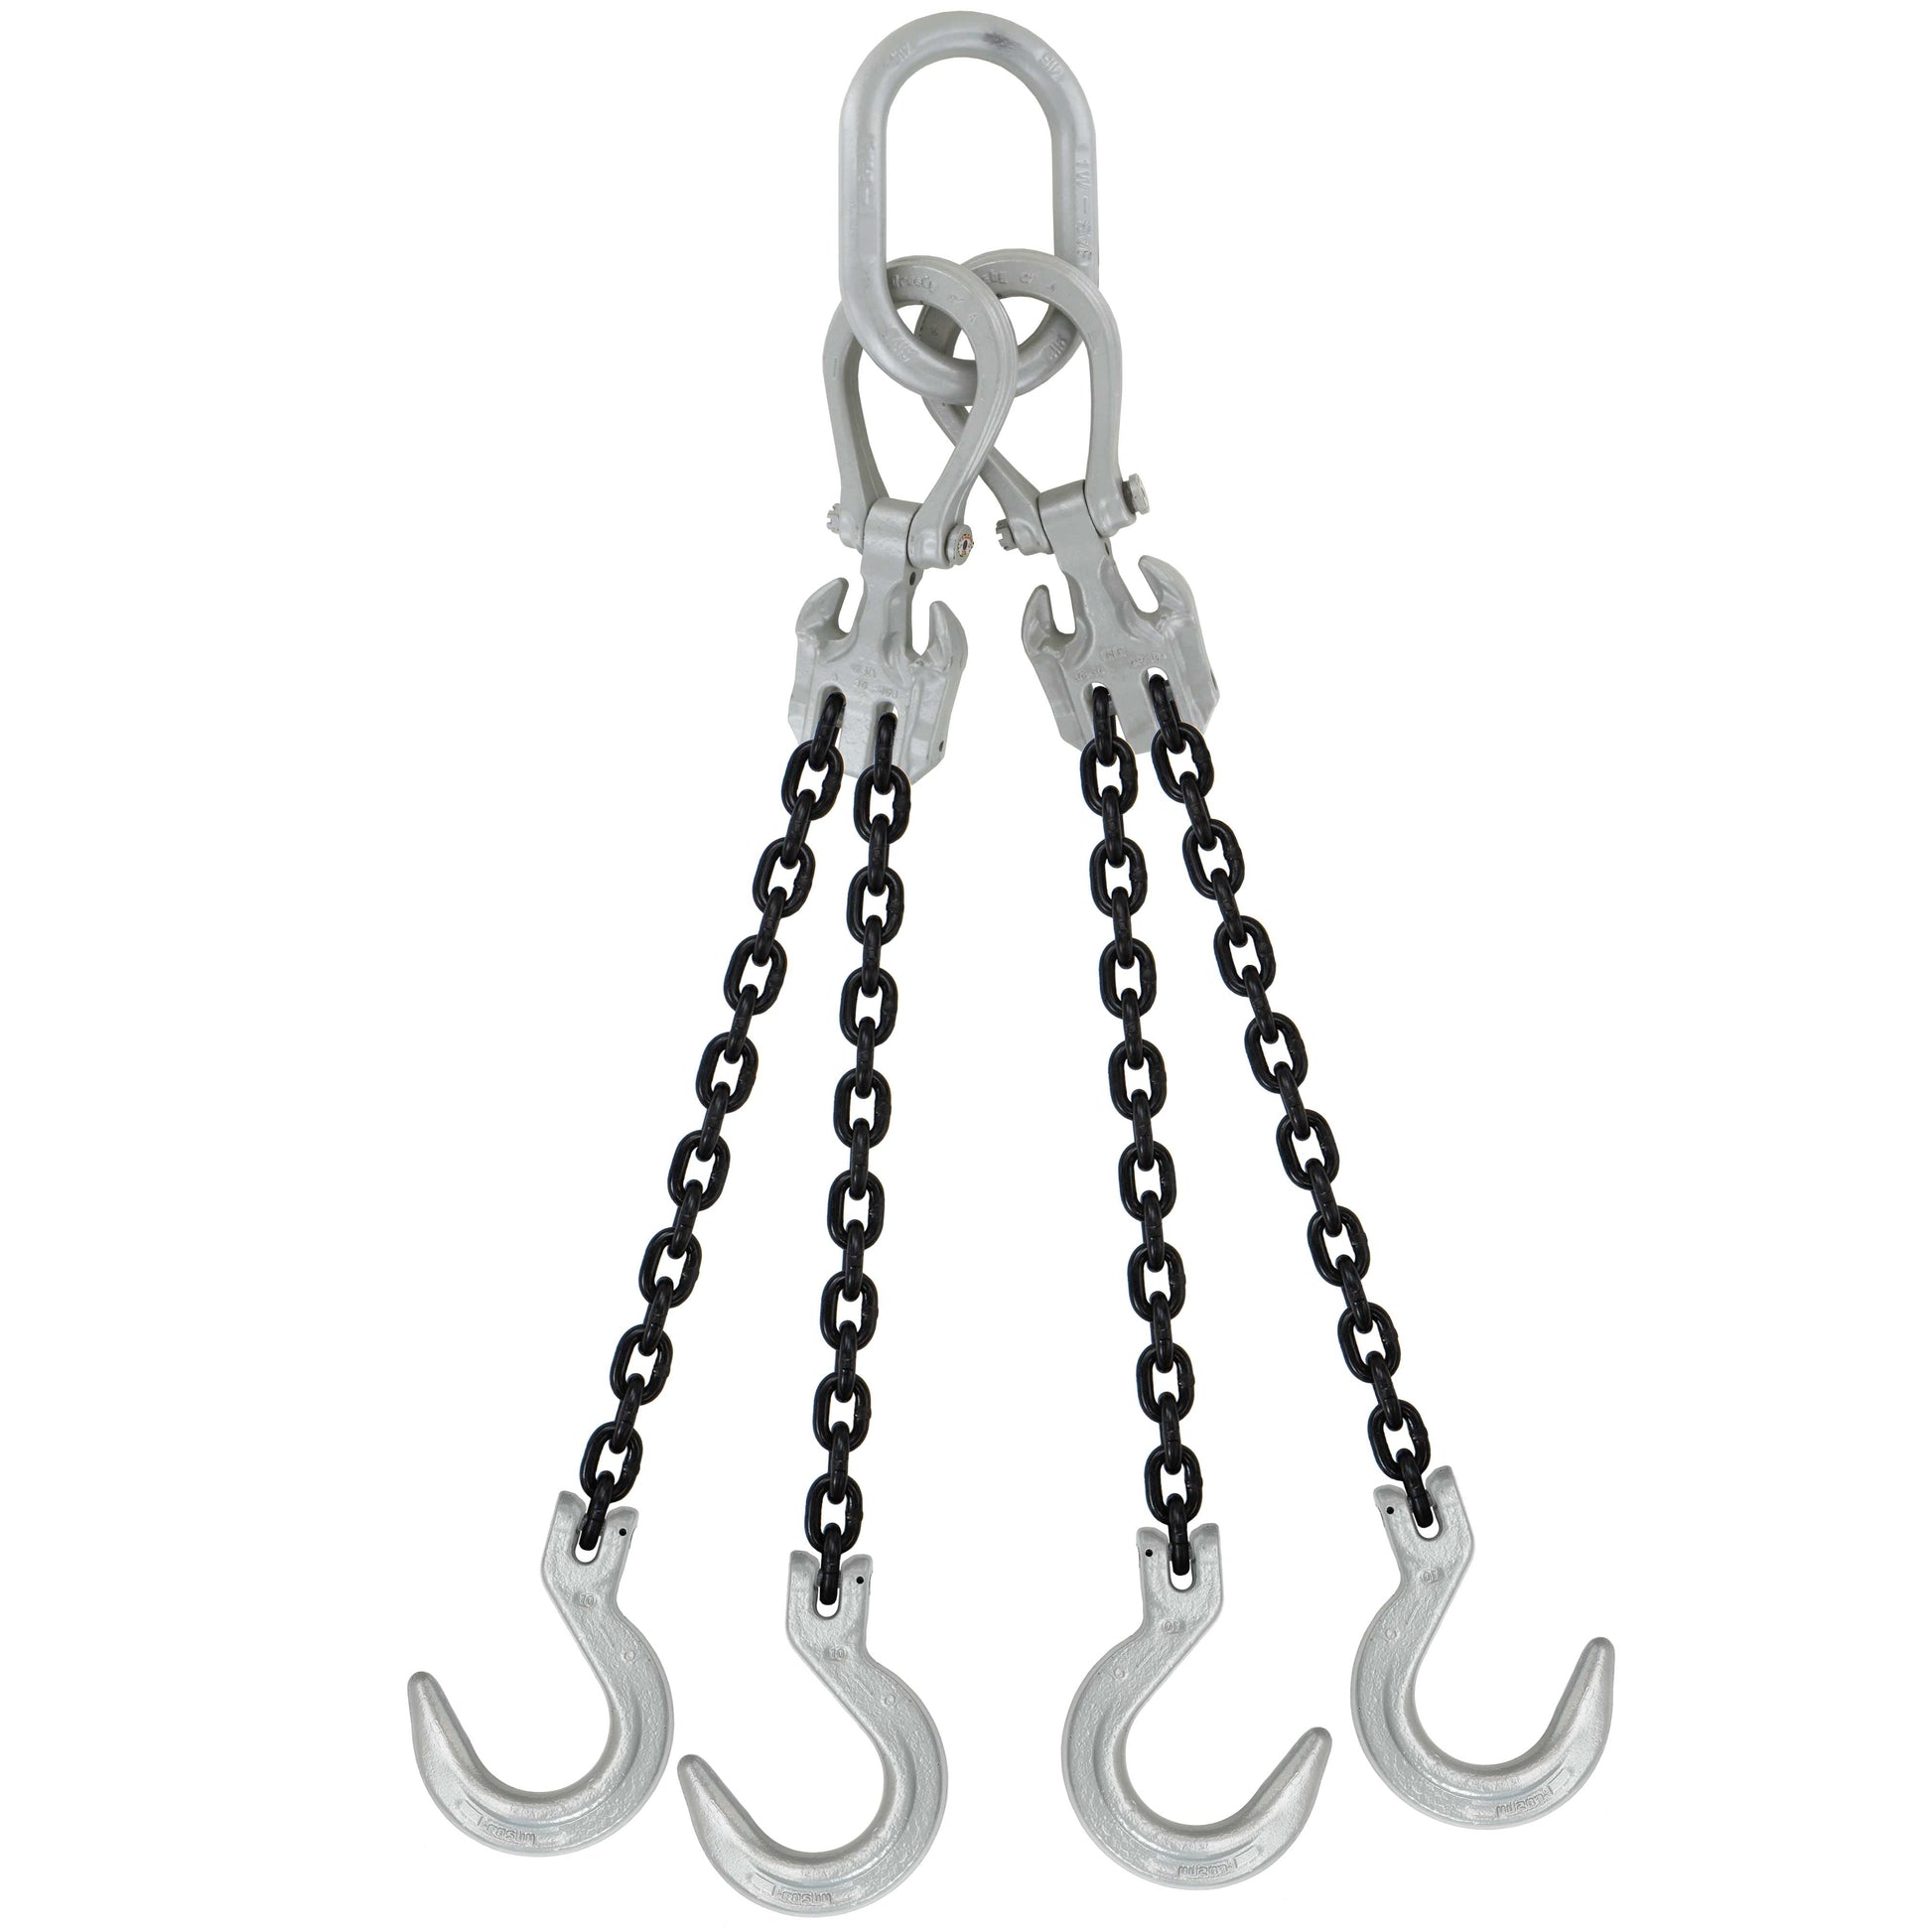 38 inch x 10 foot Domestic Adjustable 4 Leg Chain Sling w Crosby Foundry Hooks Grade 100 image 1 of 2